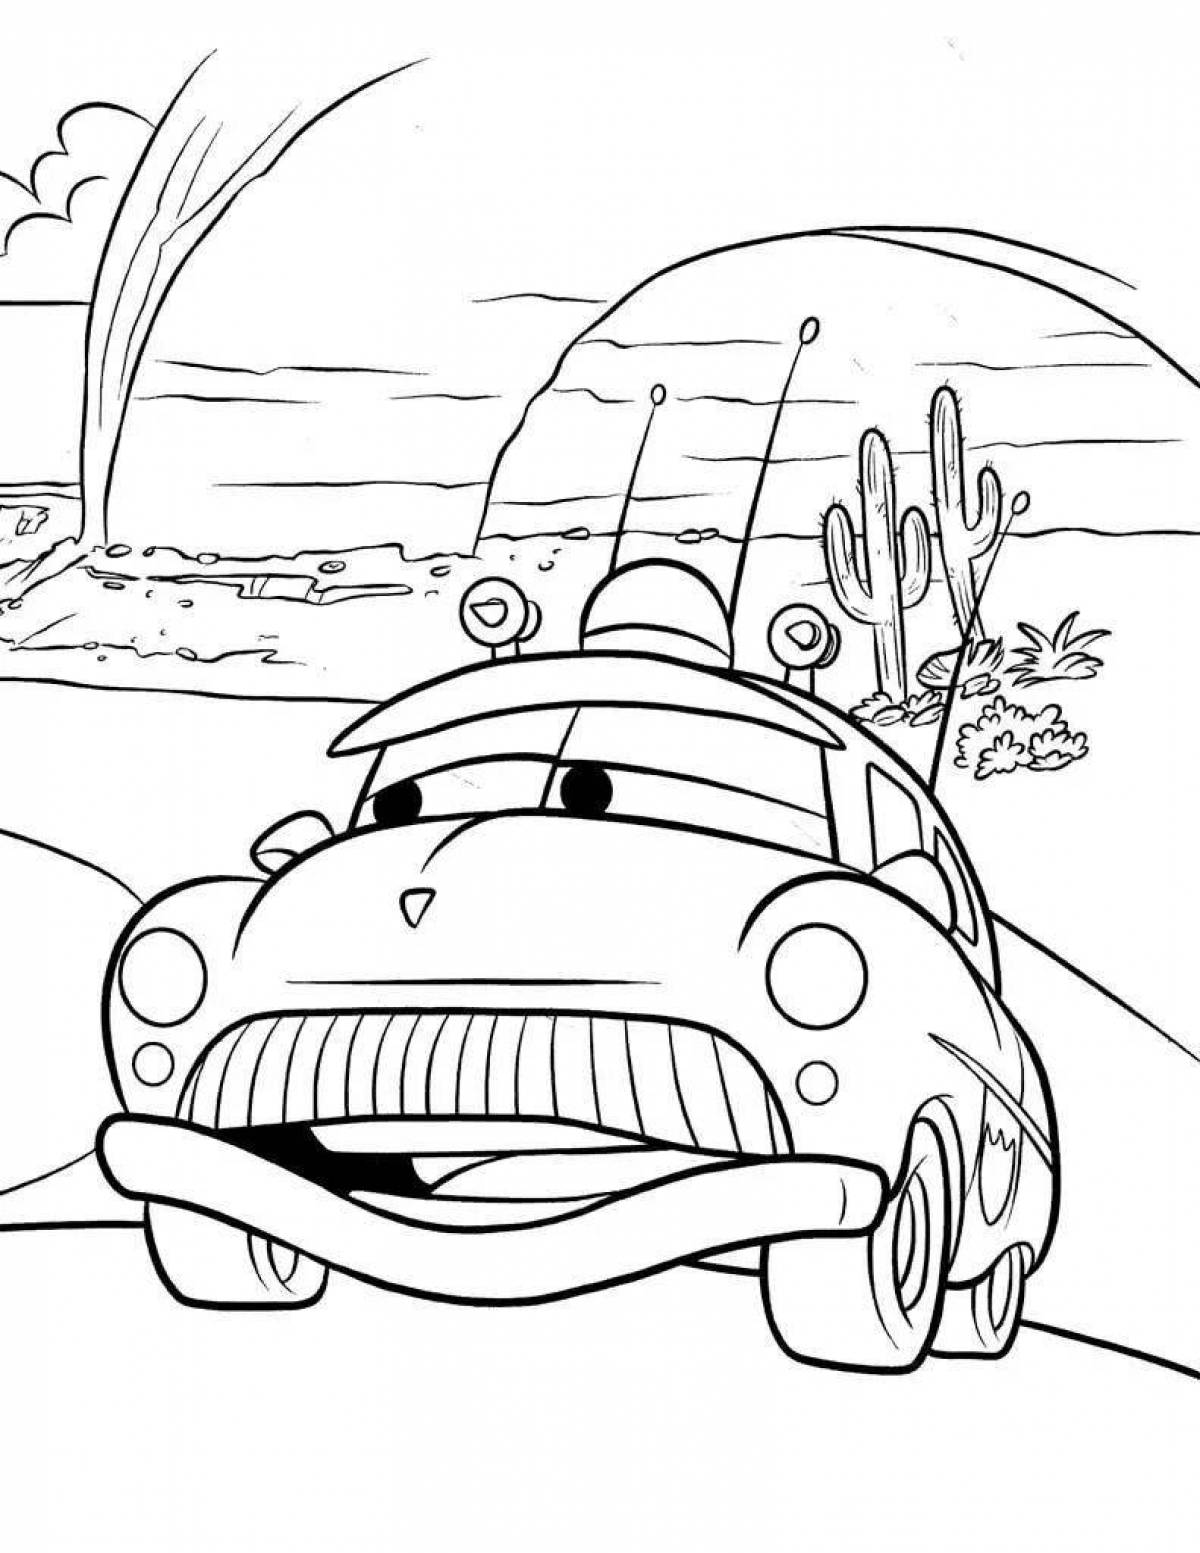 Sheriff's shining car coloring page